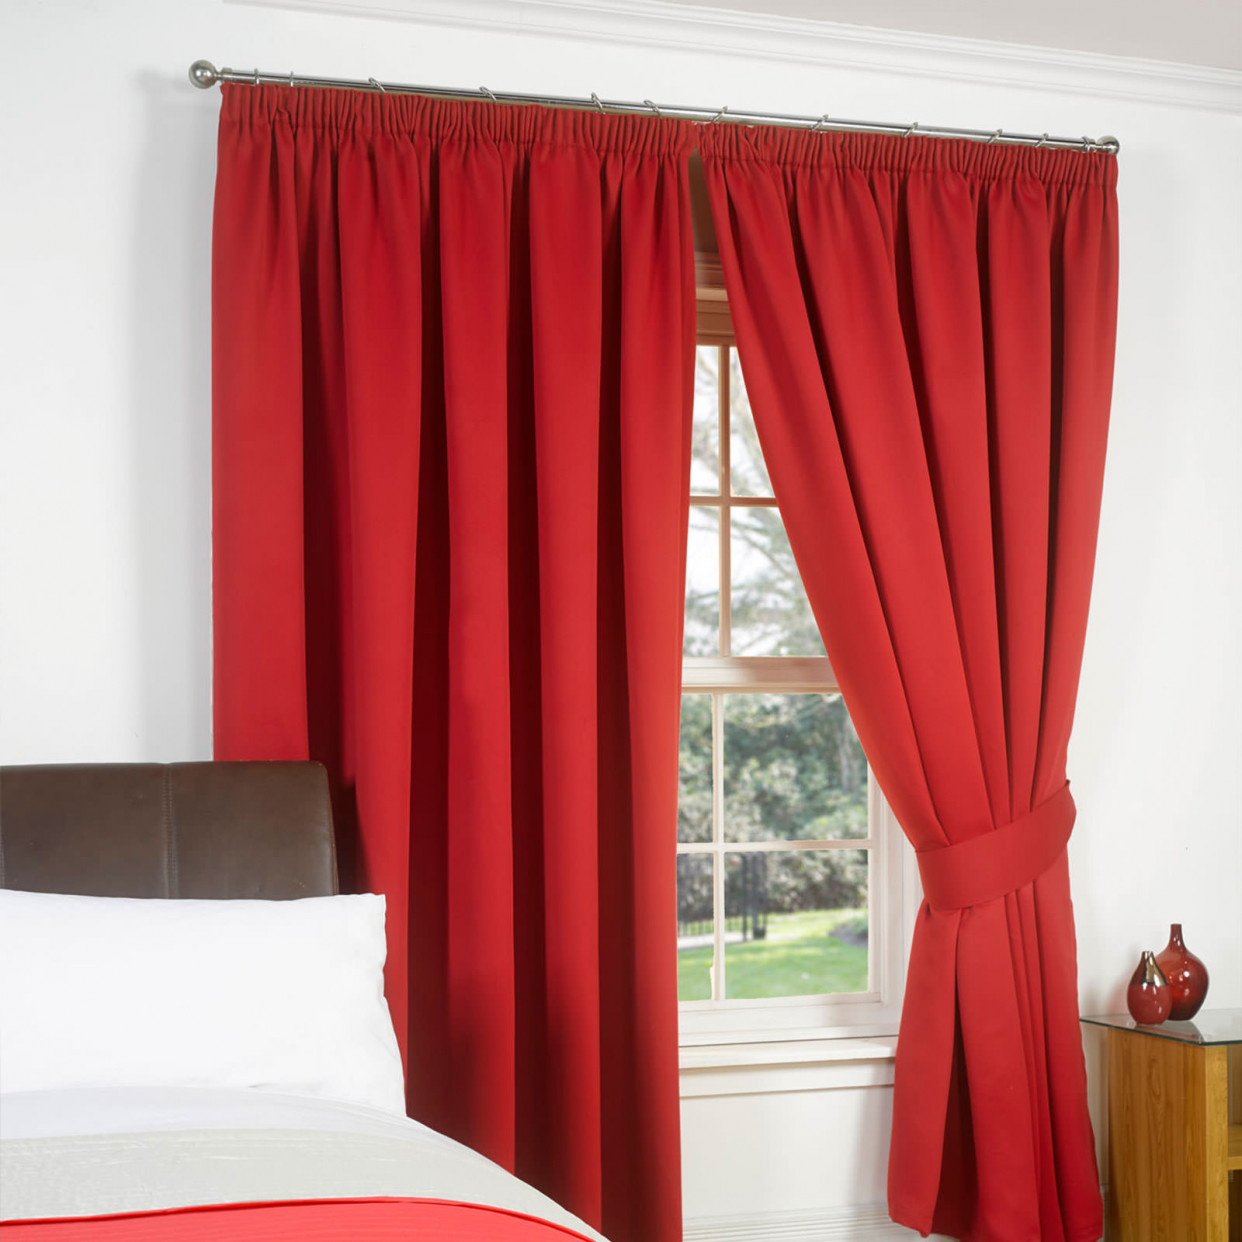 Pencil Pleat Thermal Blackout Curtains - Red 66x54>